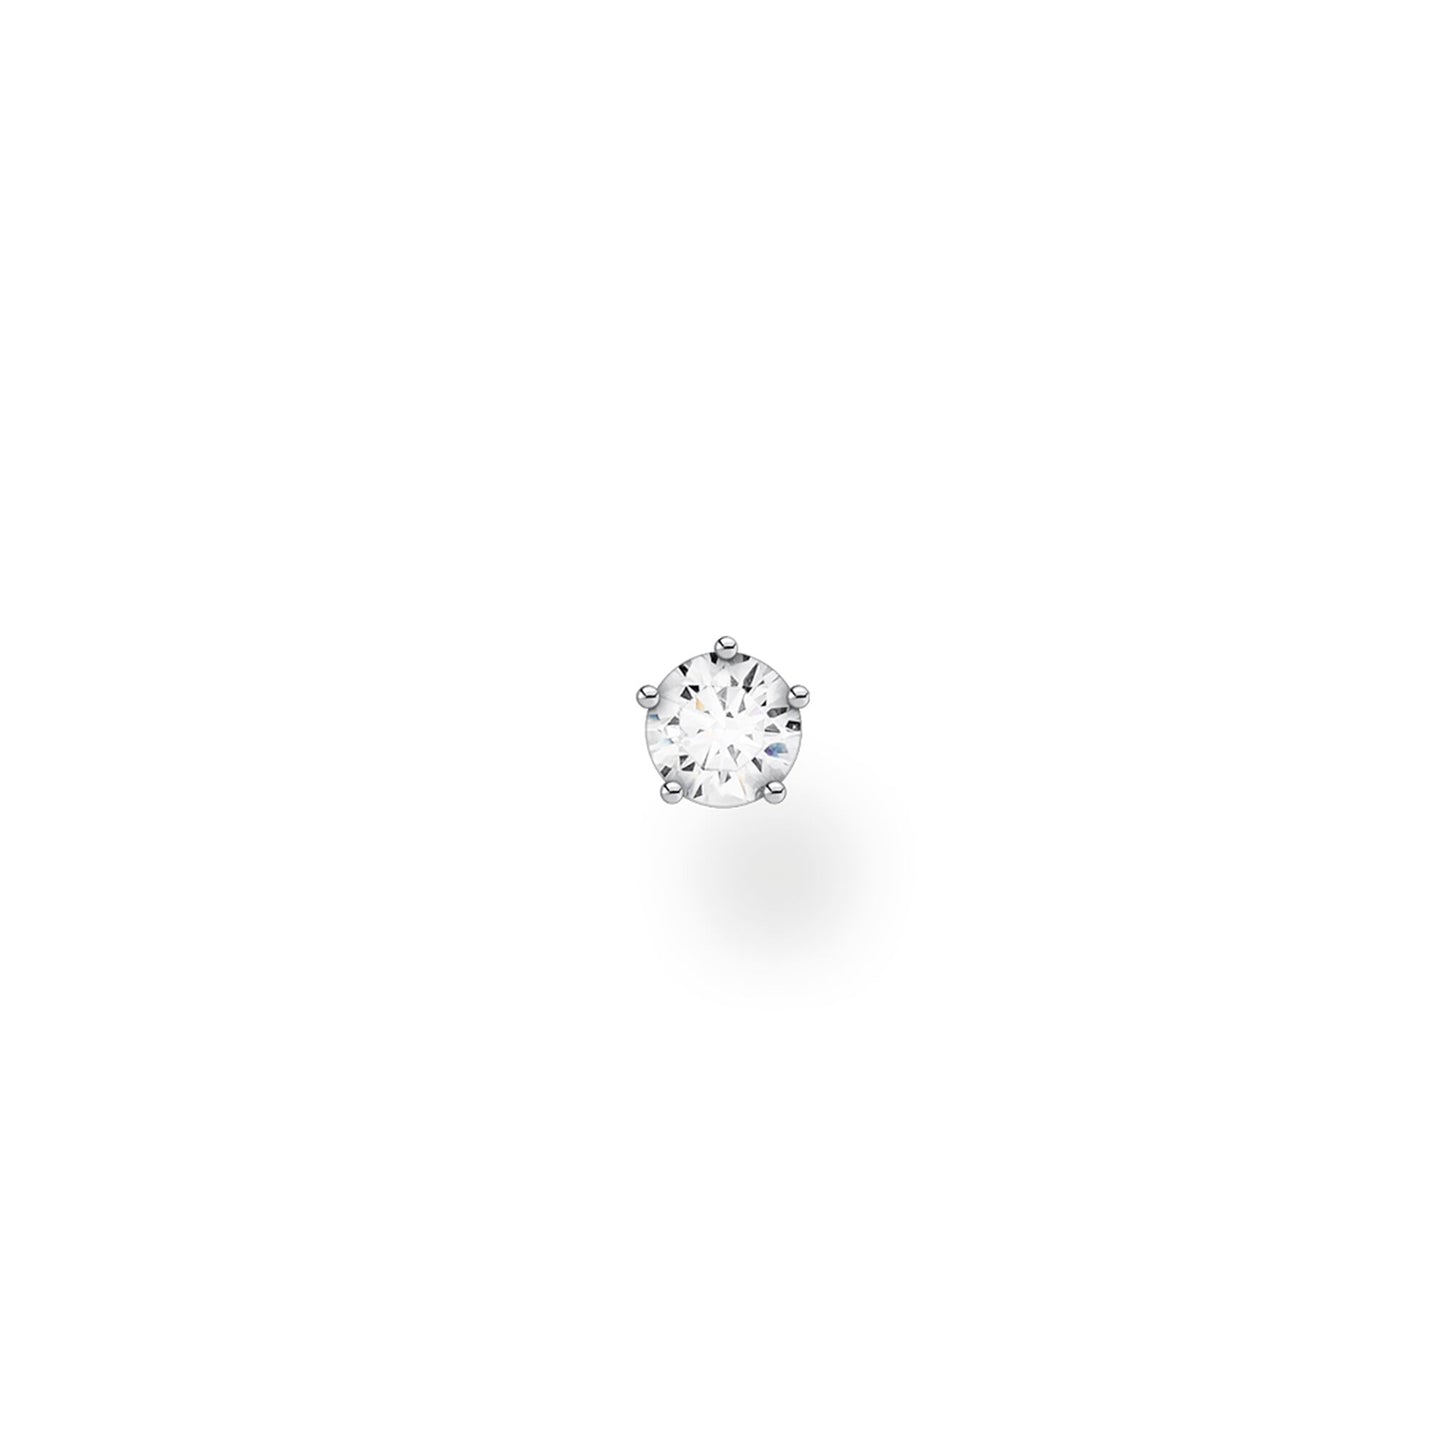 CHARMING COLLECTION EXTRA SMALL CZ STUD EARRING SINGLE